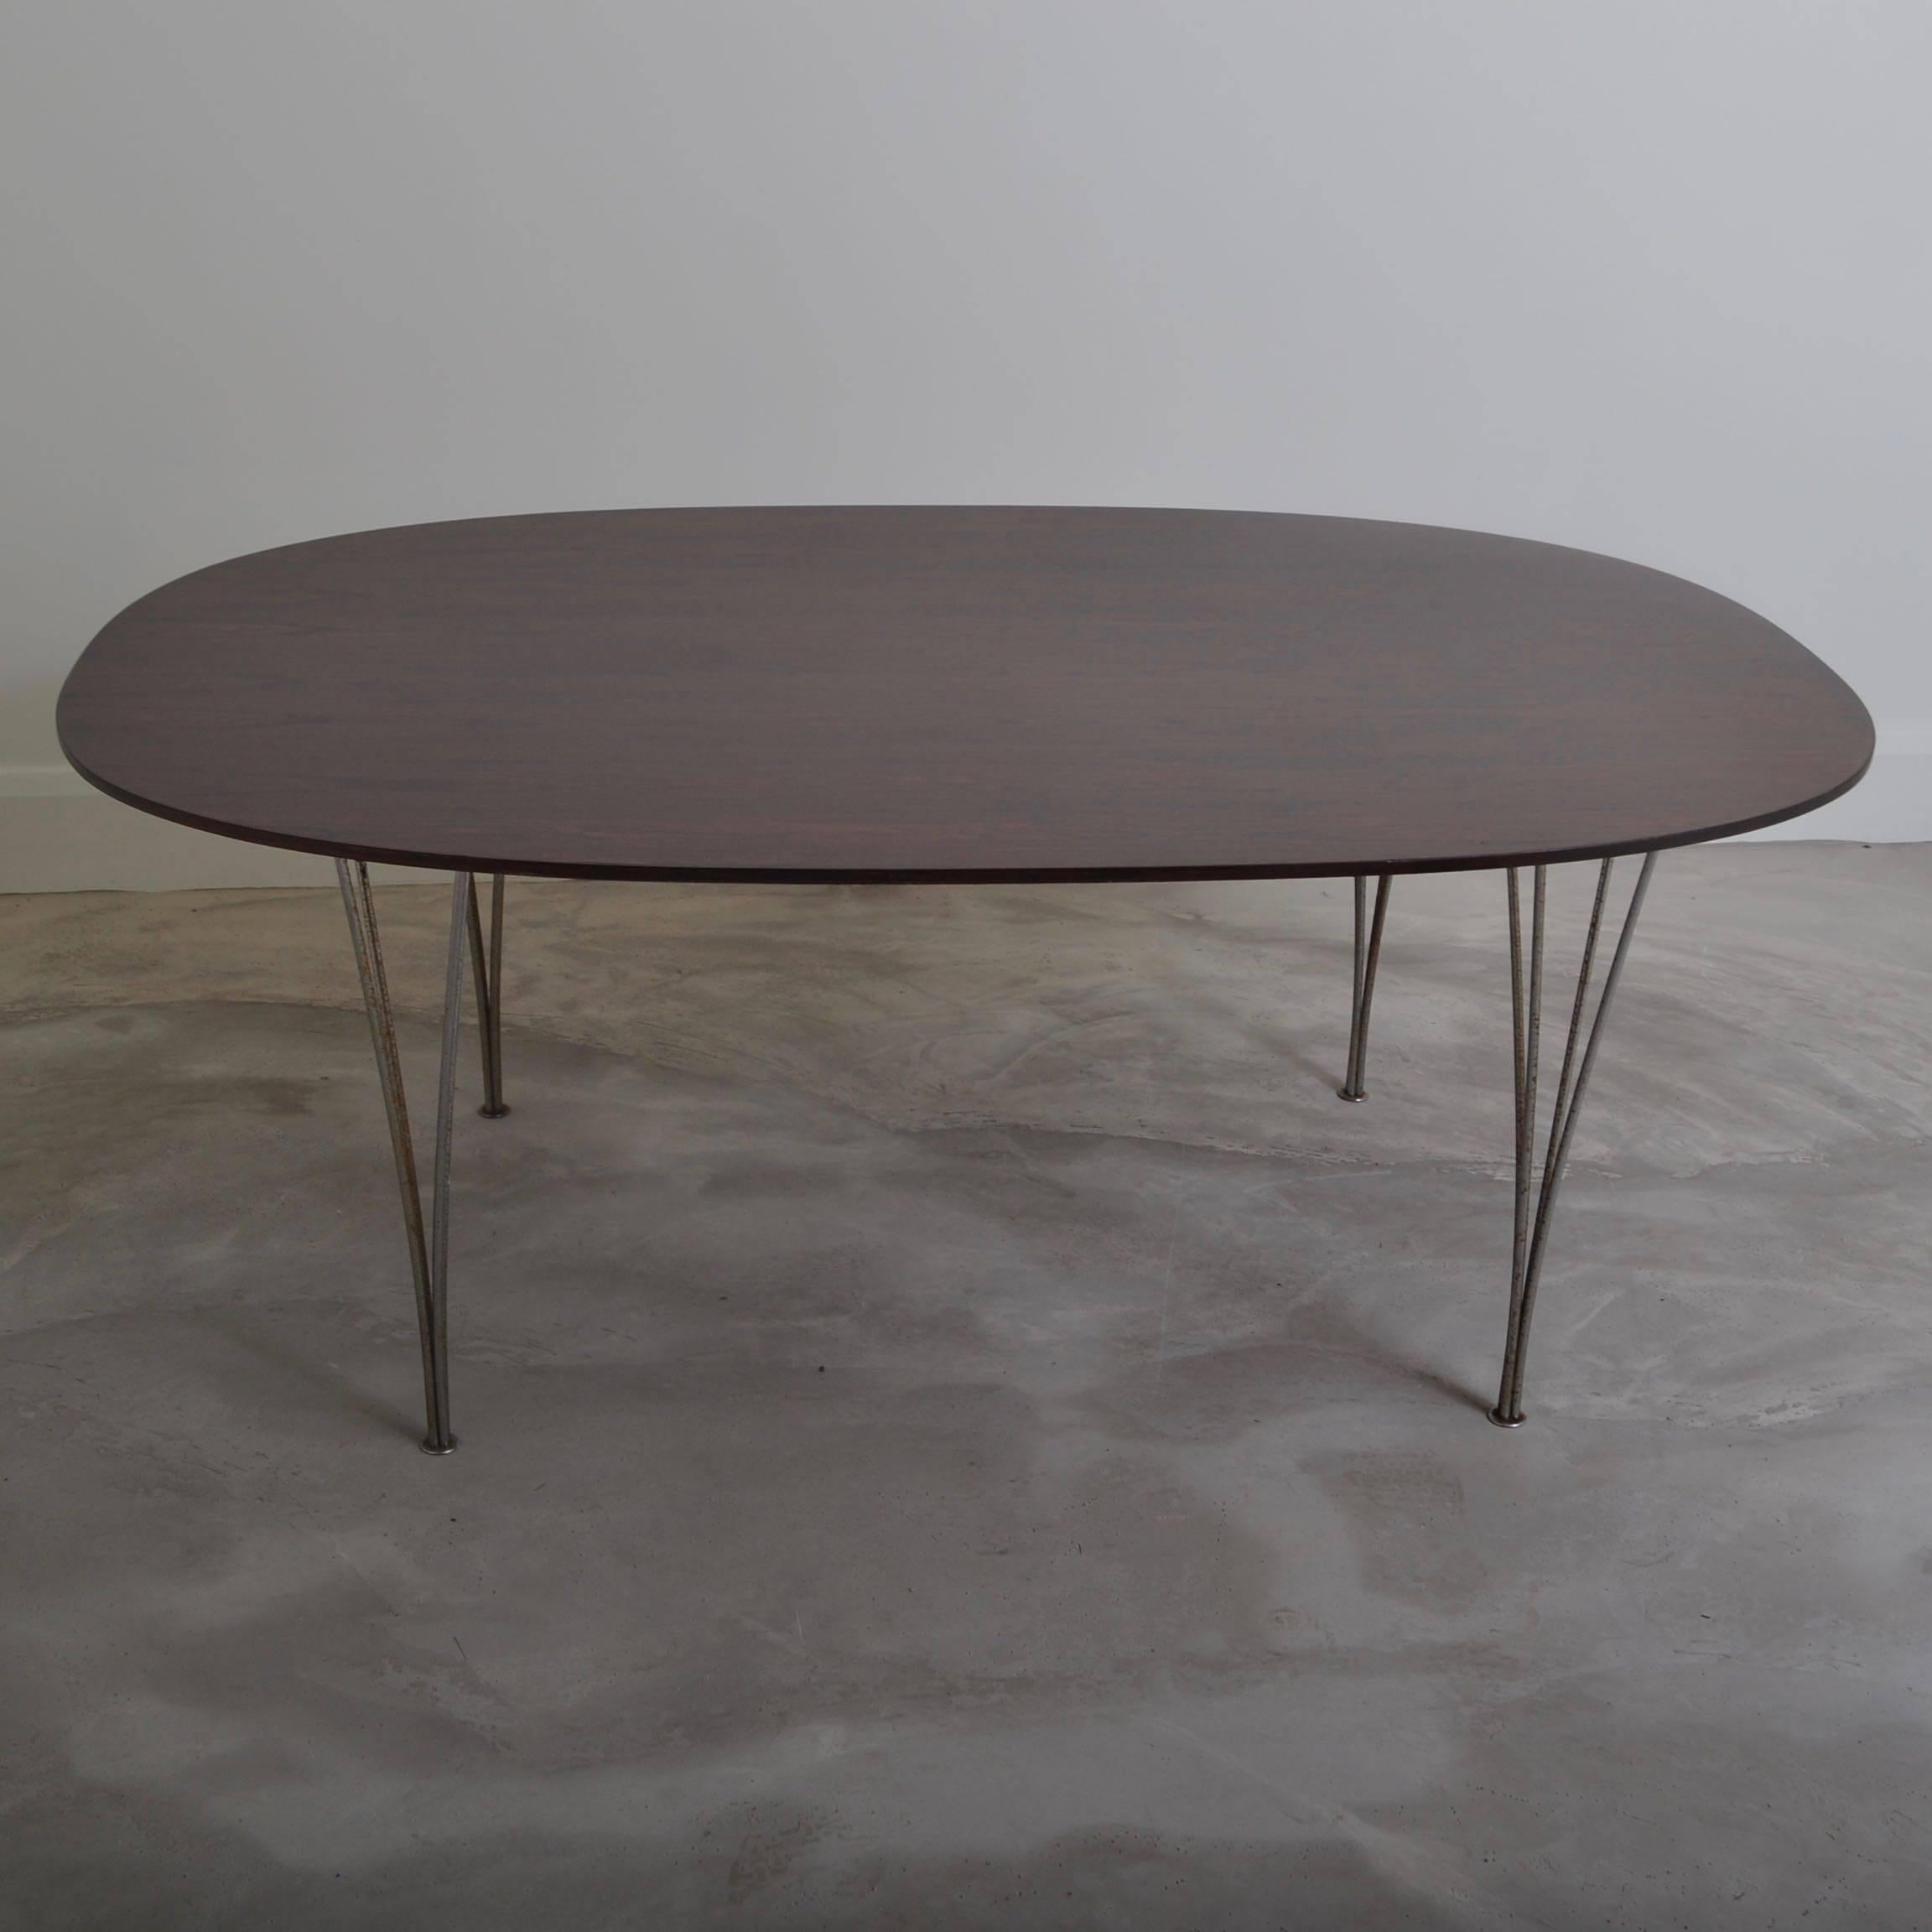 Danish Super Ellipse Dining Table by Piet Hein and Bruno Mathsson, Denmark 1974 For Sale